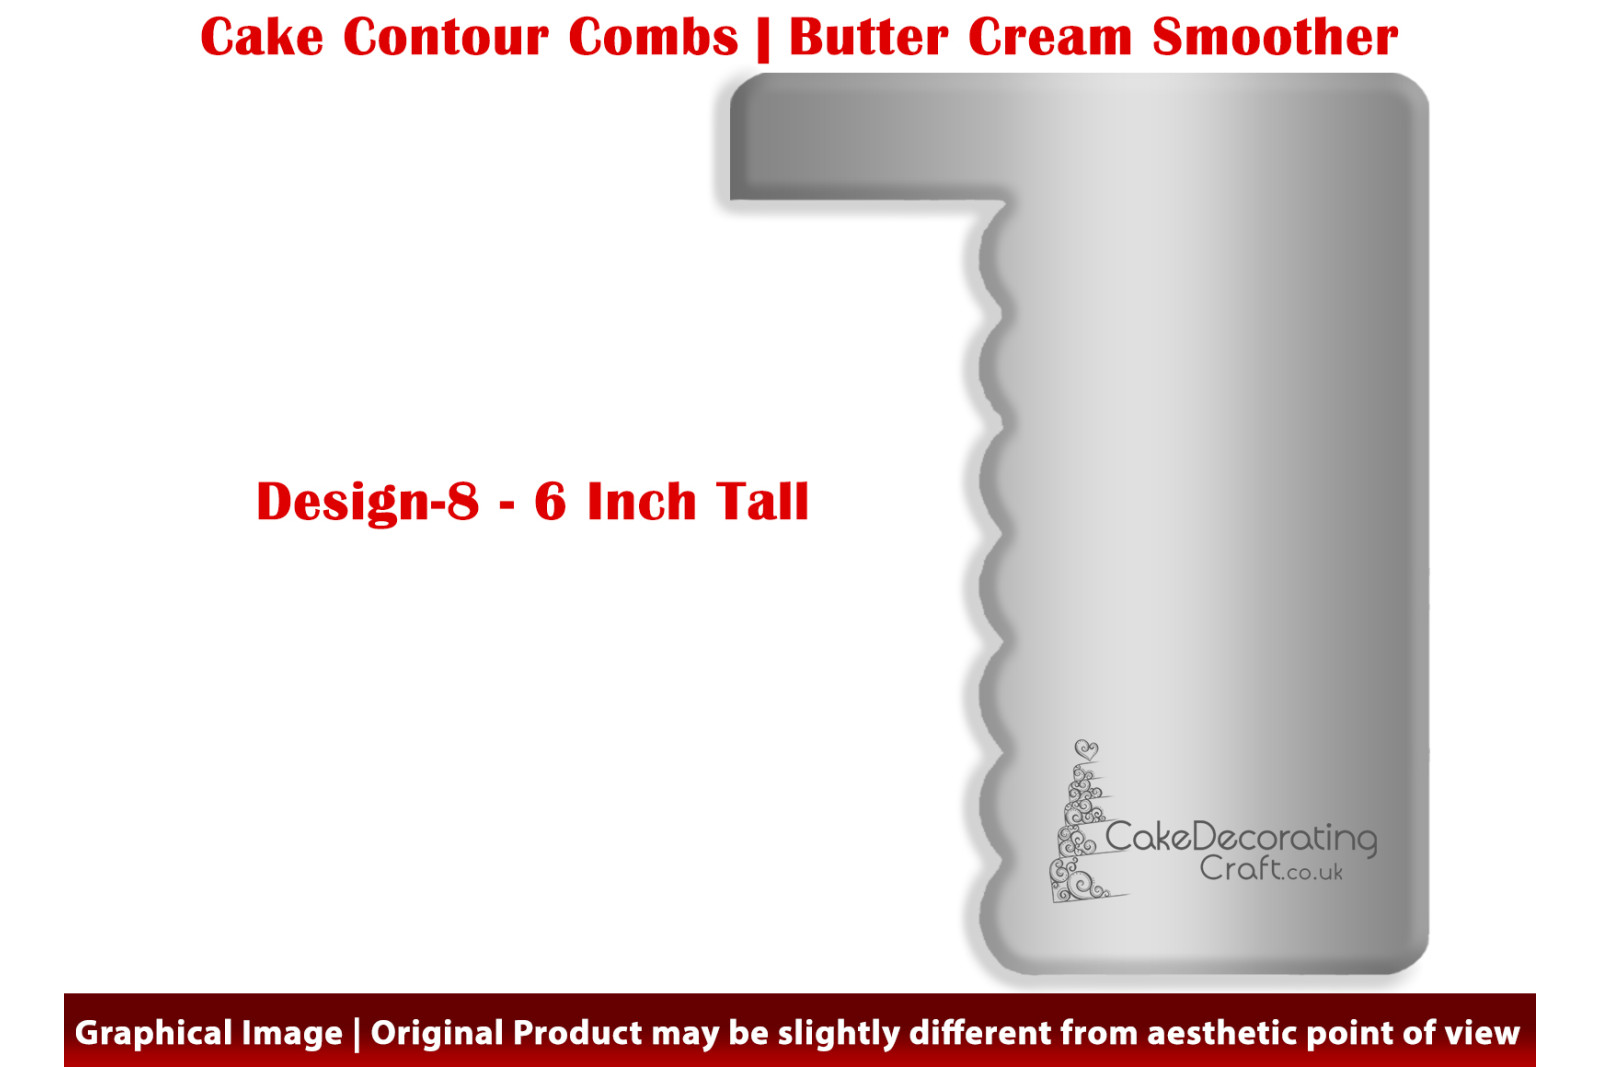 Fabulous Facets | Design 8 | 6 Inch | Cake Decorating Craft | Cake Contour Combs | Smoothing | Metal Spreader | Butter Cream Smoothing | Genius Tool